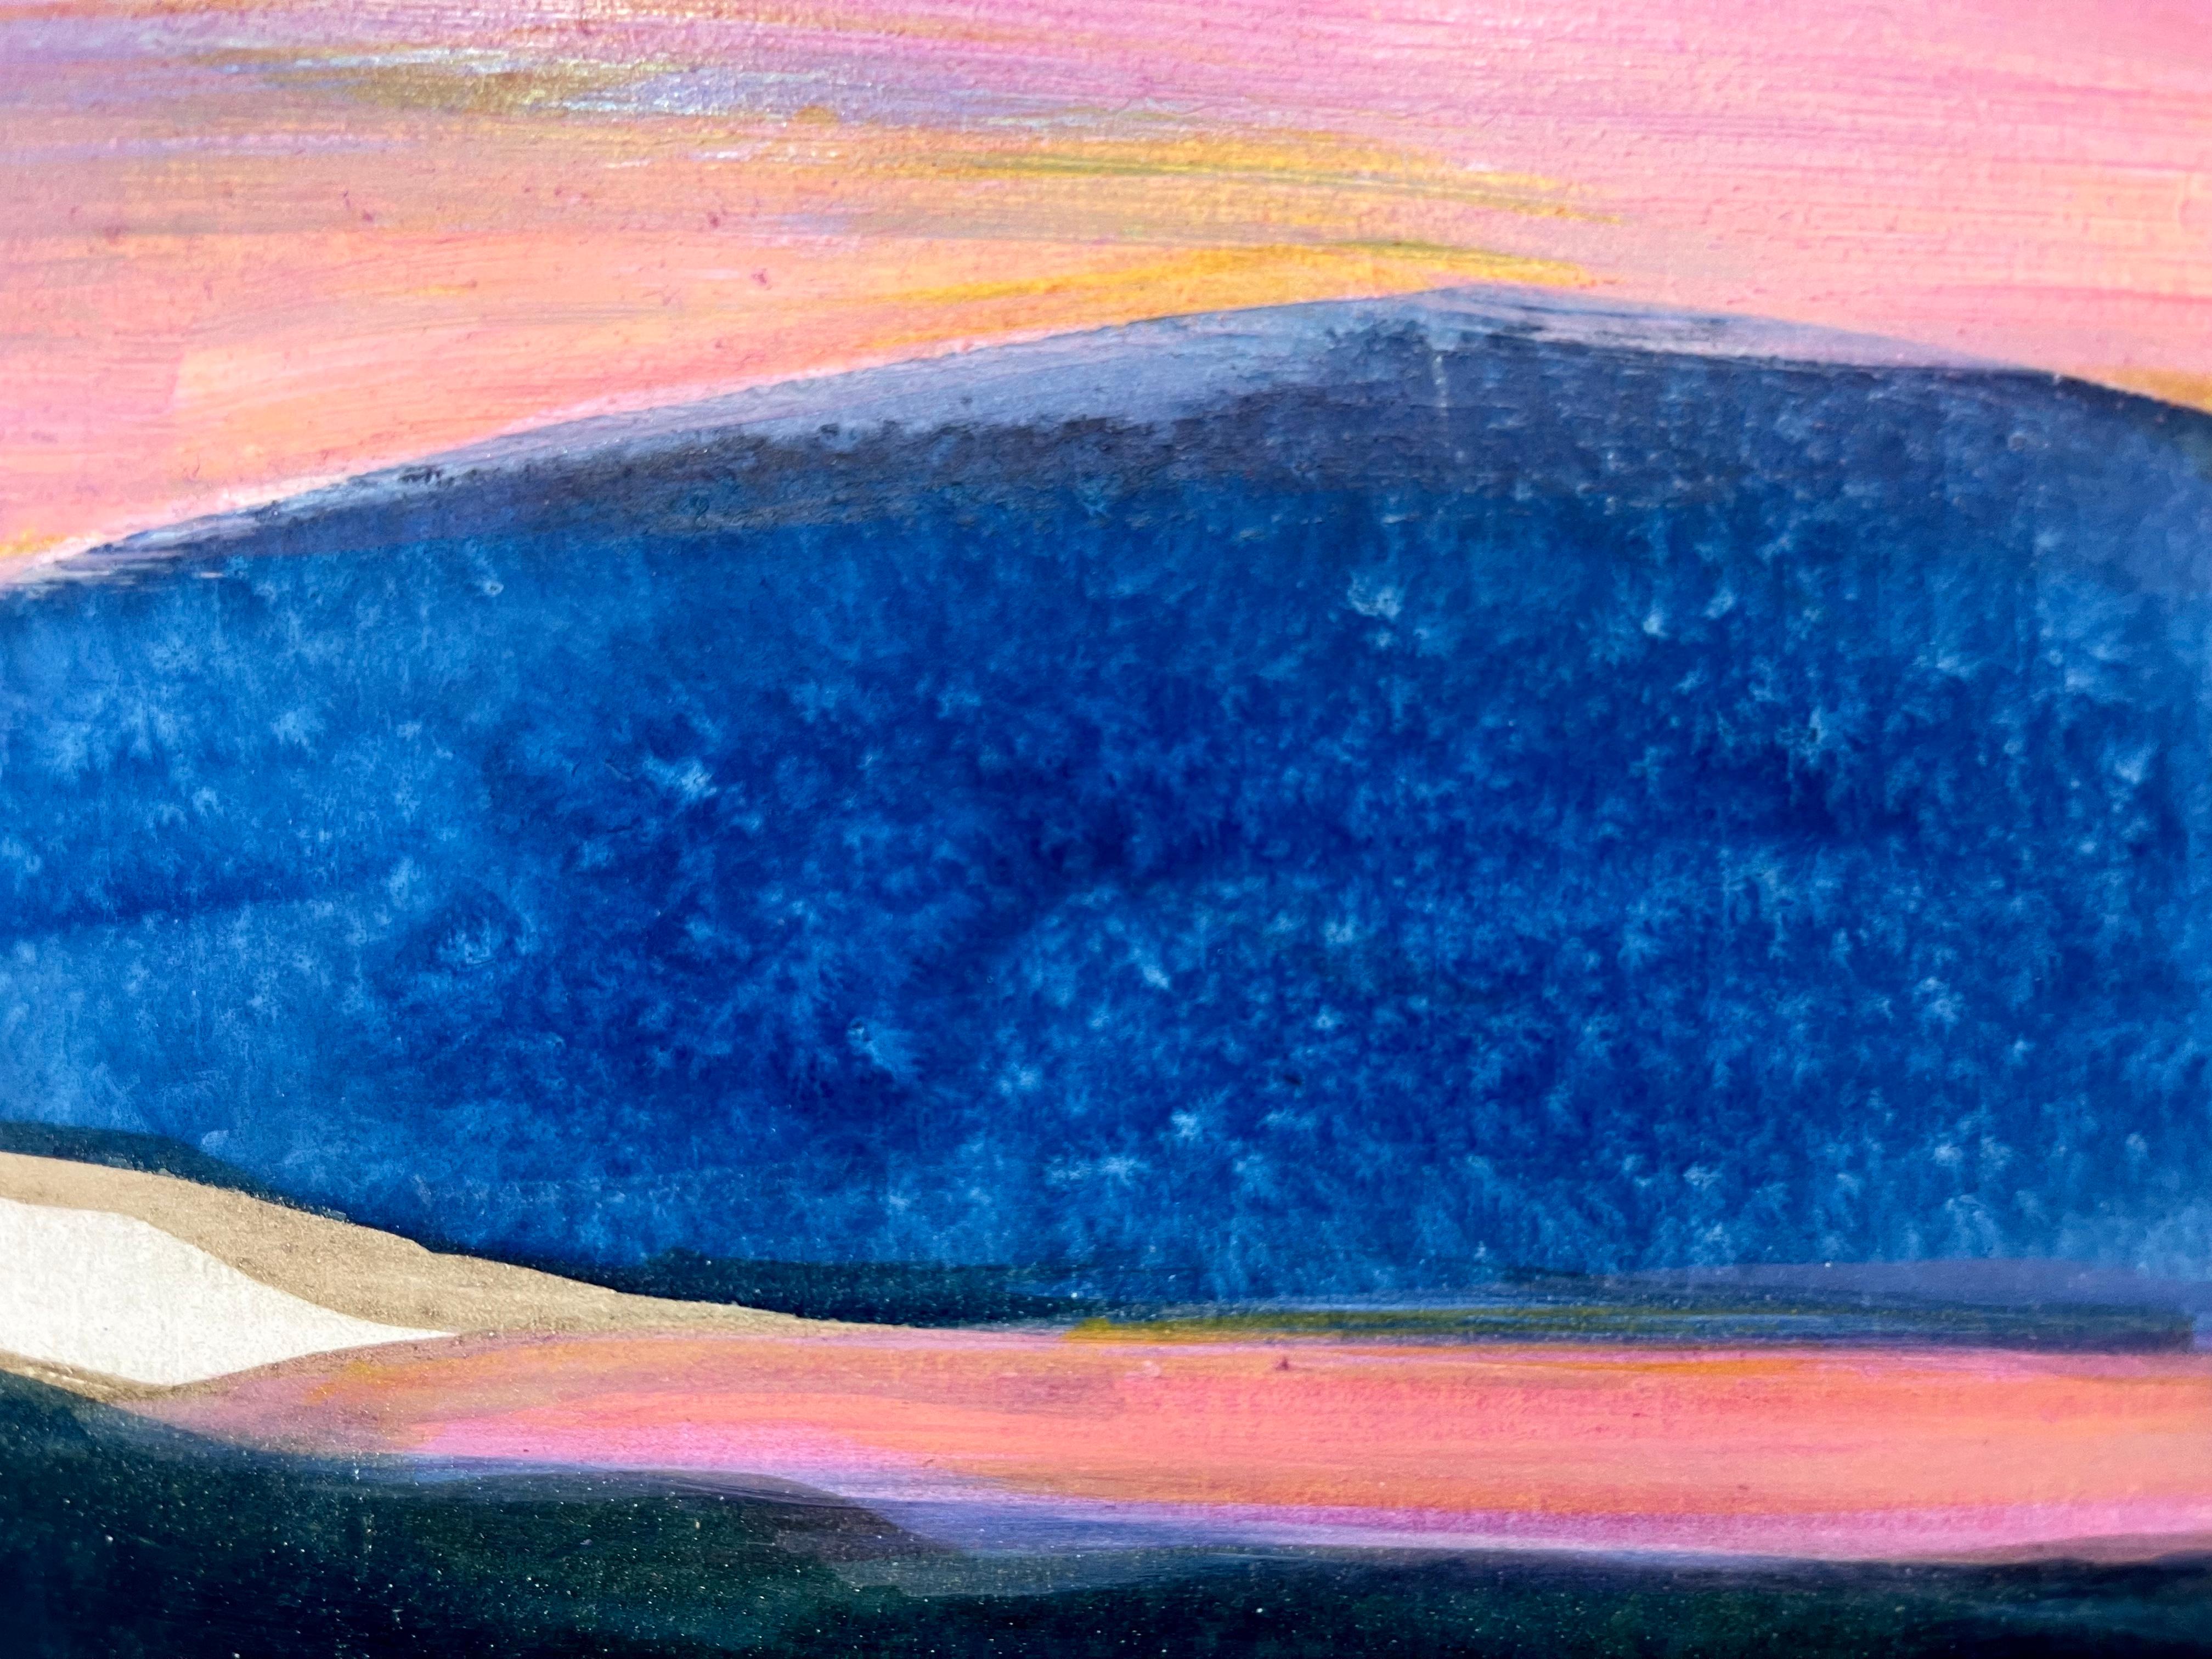 Lake View, landscape painting of pink and purple sunrise over blue mountain - Purple Landscape Painting by Katharine Dufault